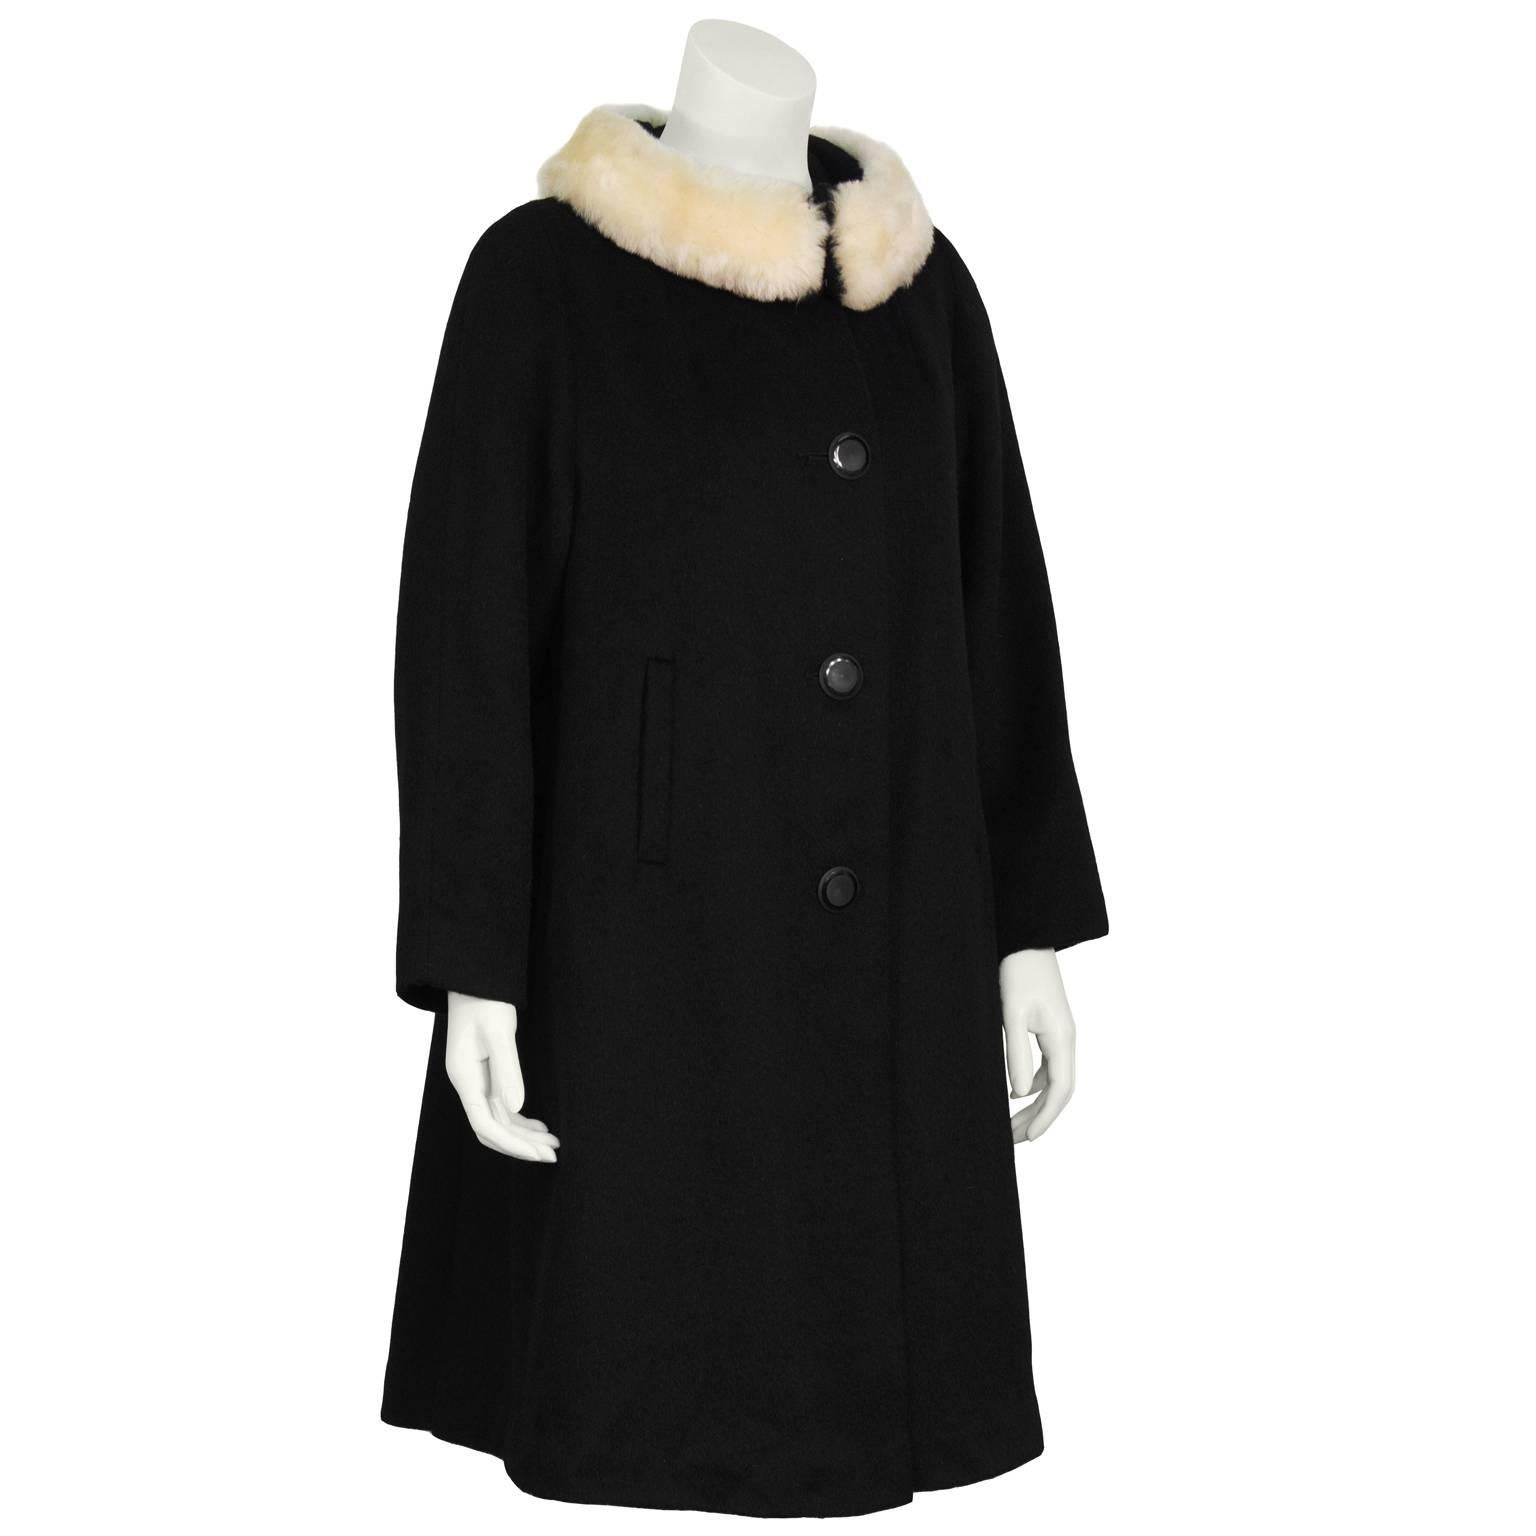 Lilli Ann 1960’s black wool swing coat with a cream faux fur detail at neck. The coat does up the front with large black circular buttons and the faux fur collar closes with large hook and eyes. Features two side slit pockets Still stitched close